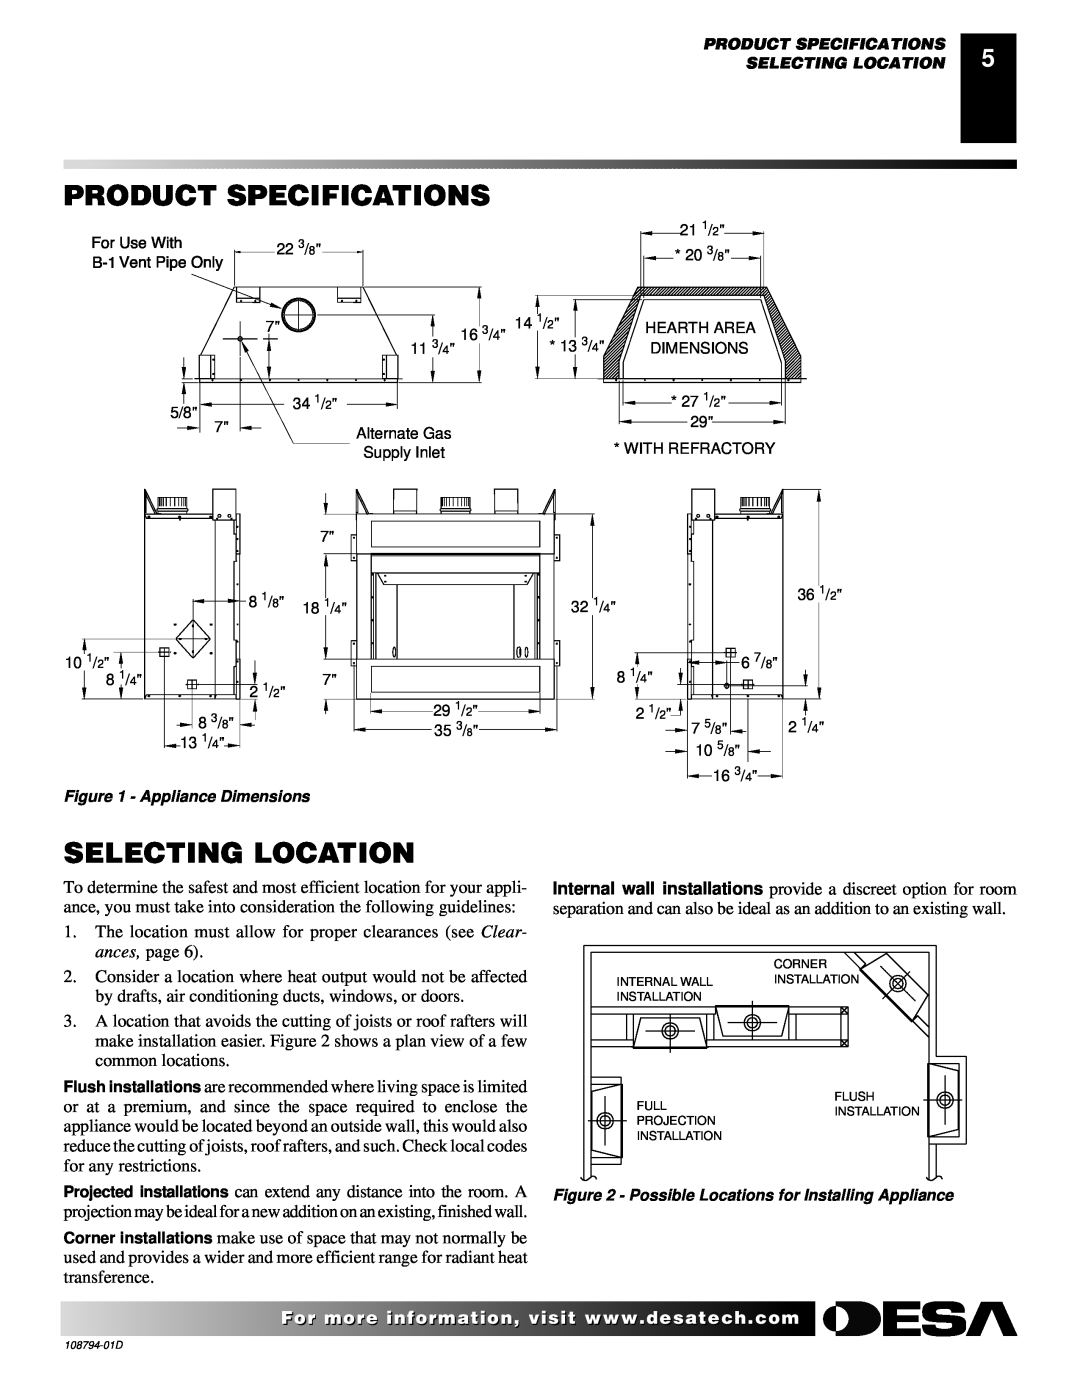 Desa VP325E(B) installation manual Product Specifications Selecting Location, Appliance Dimensions 